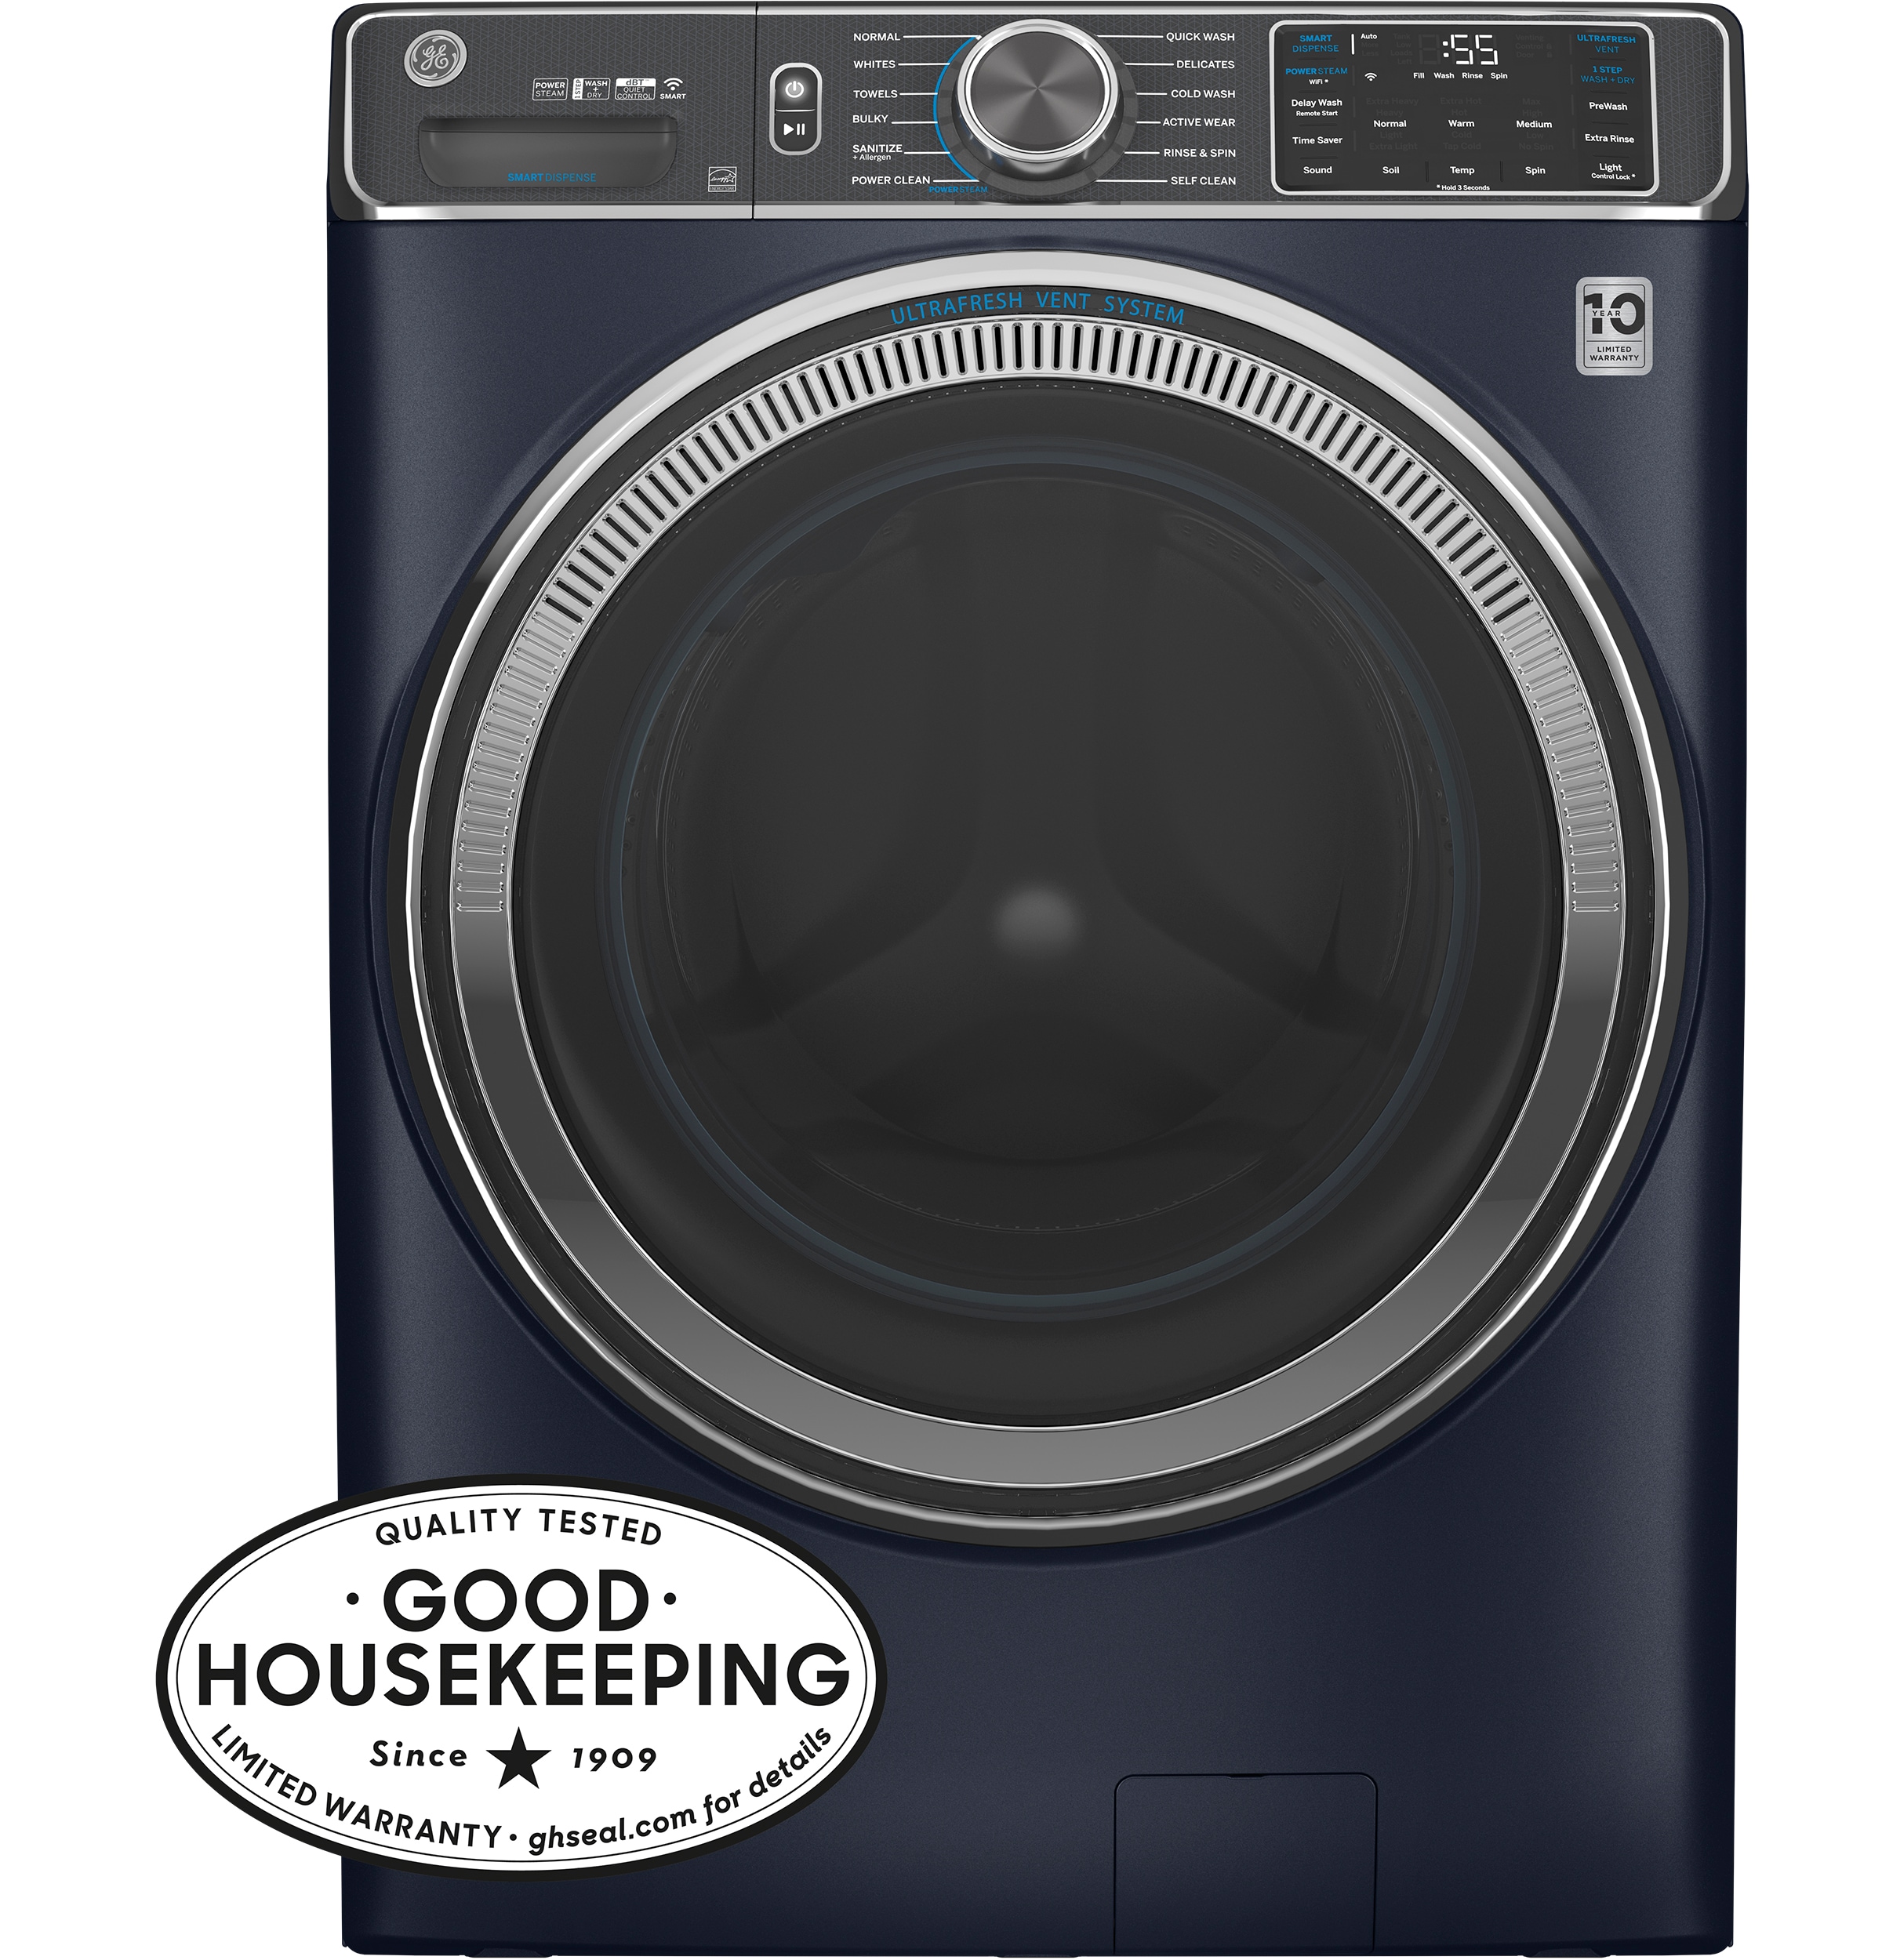 UltraFresh Vent System 5-cu ft Stackable Steam Cycle Front-Load Washer (Sapphire Blue) ENERGY STAR in the Front-Load Washers department at Lowes.com